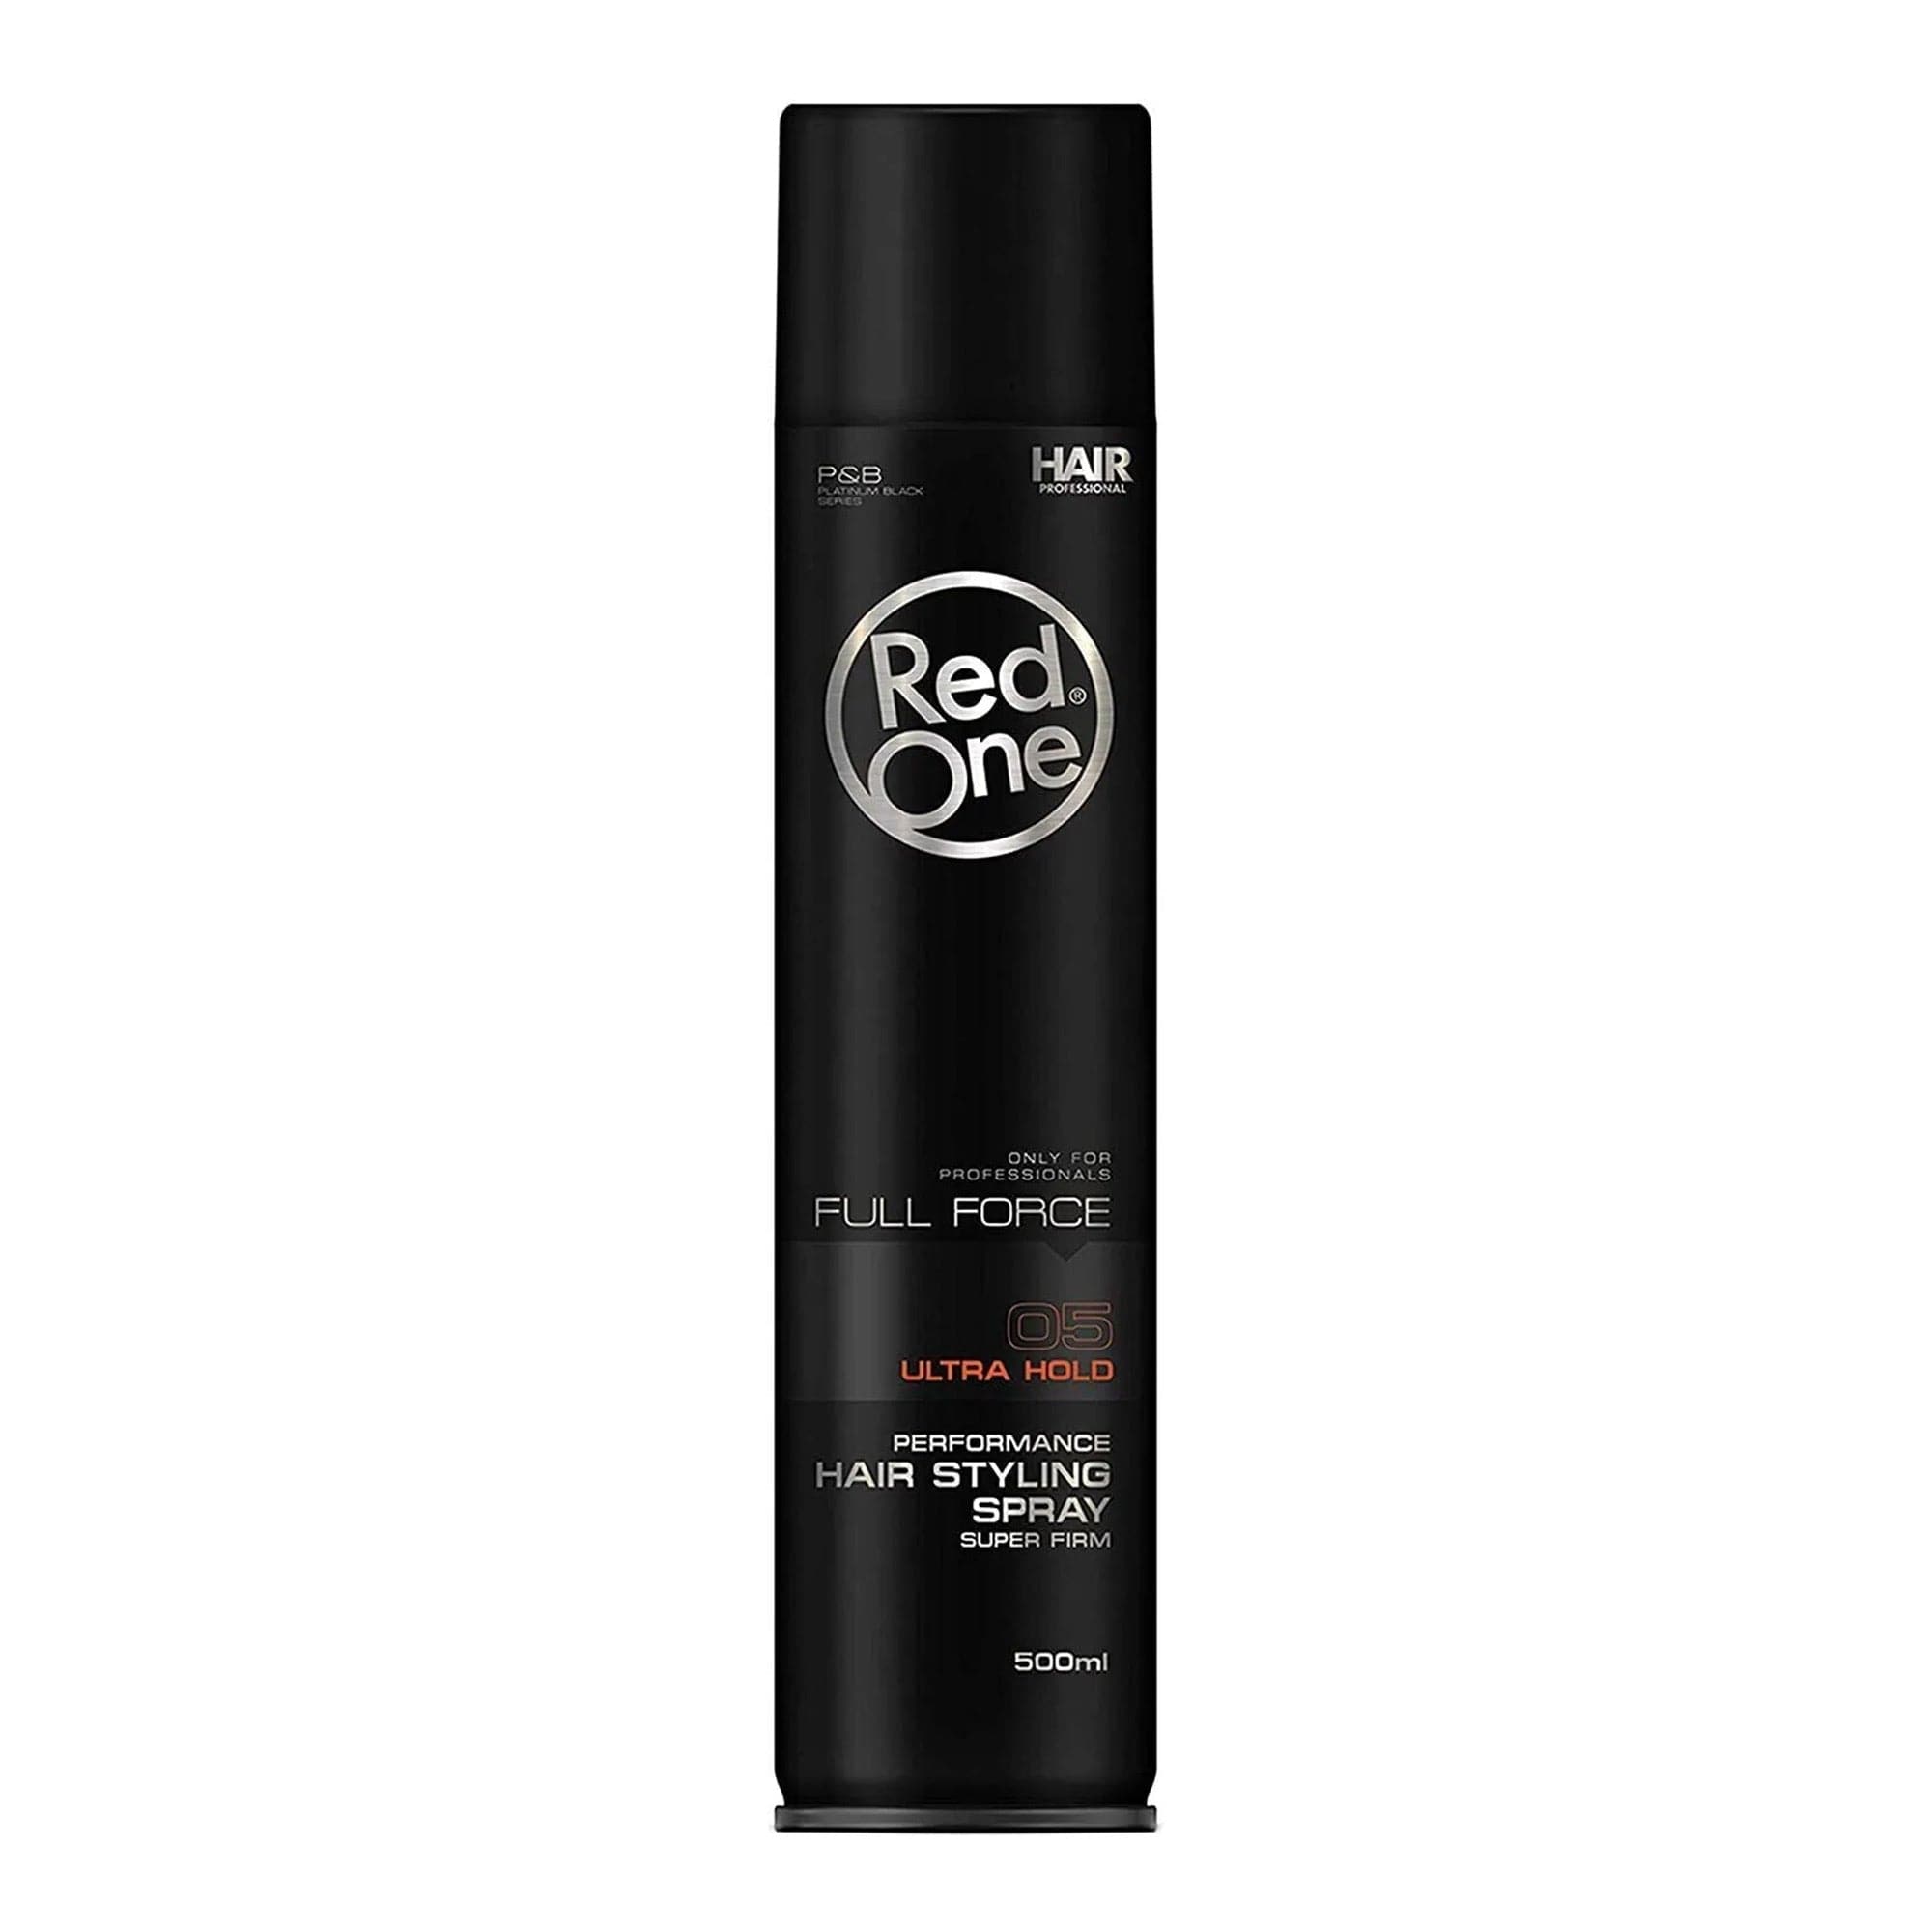 Redone - Hair Styling Spray Full Force 05 Ultra Hold 400ml